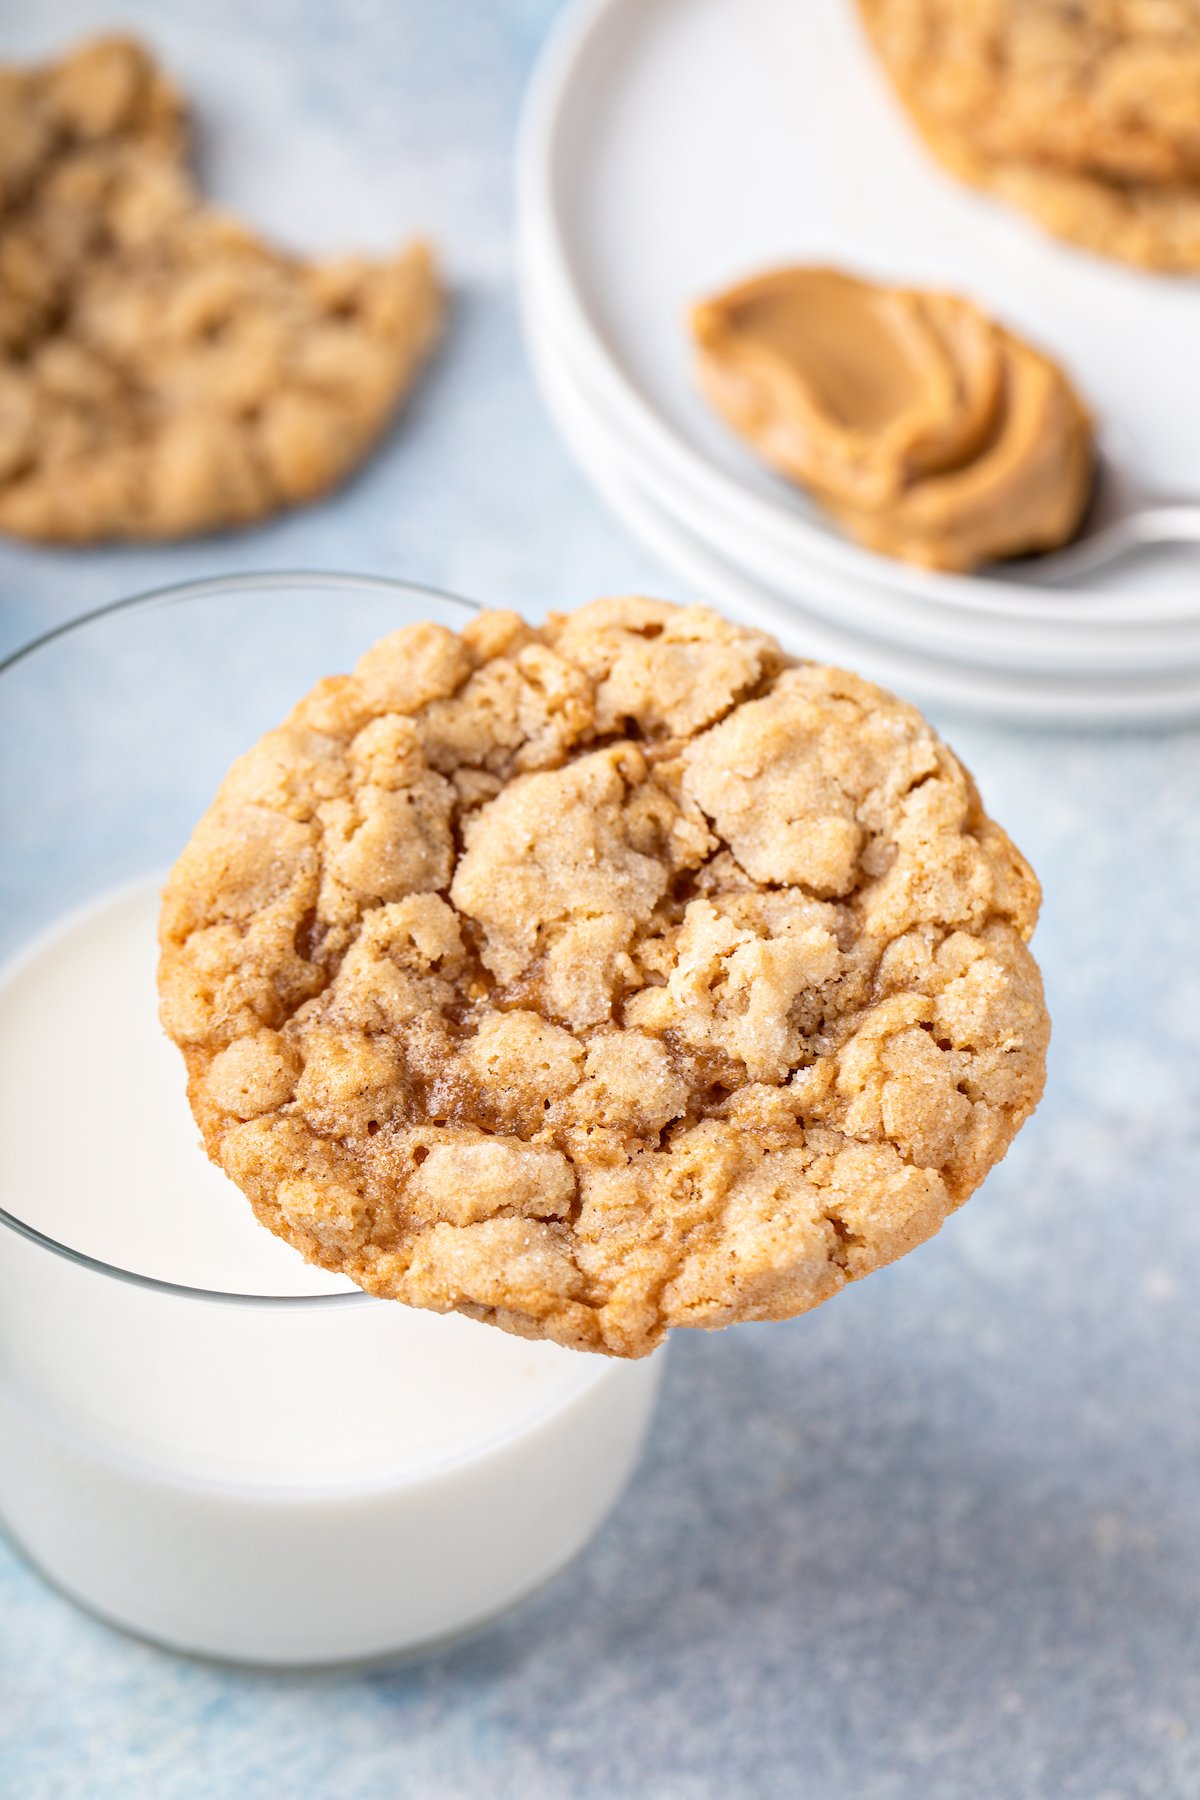 A peanut butter cookie balanced on the rim of a glass of milk. A saucer with pieces of cookie is in the background.